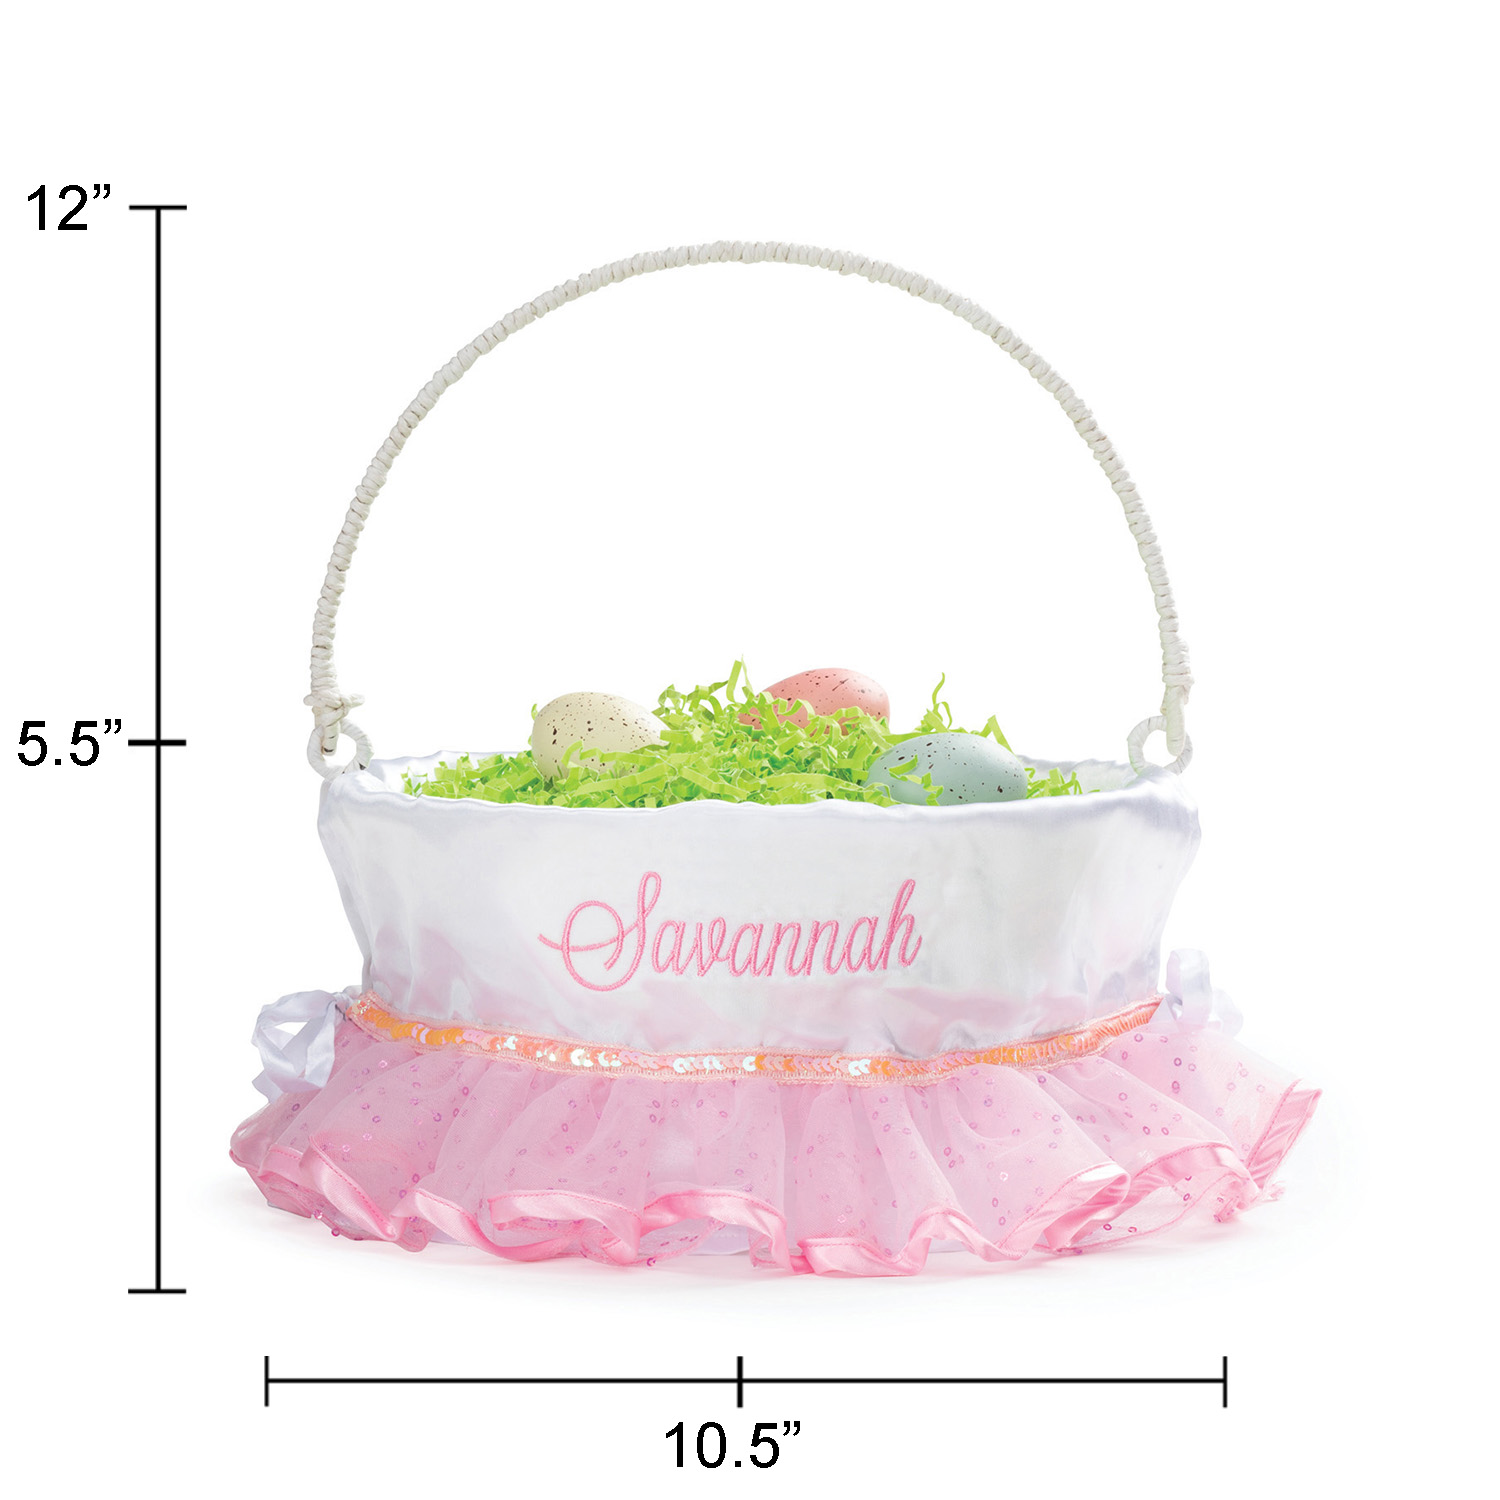 Personalized Planet Pink and White Tutu Liner with Custom Name Embroidered in Pink Thread on White Woven Spring Easter Basket with Collapsible Handle for Egg Hunt or Book Toy Storage - image 4 of 5